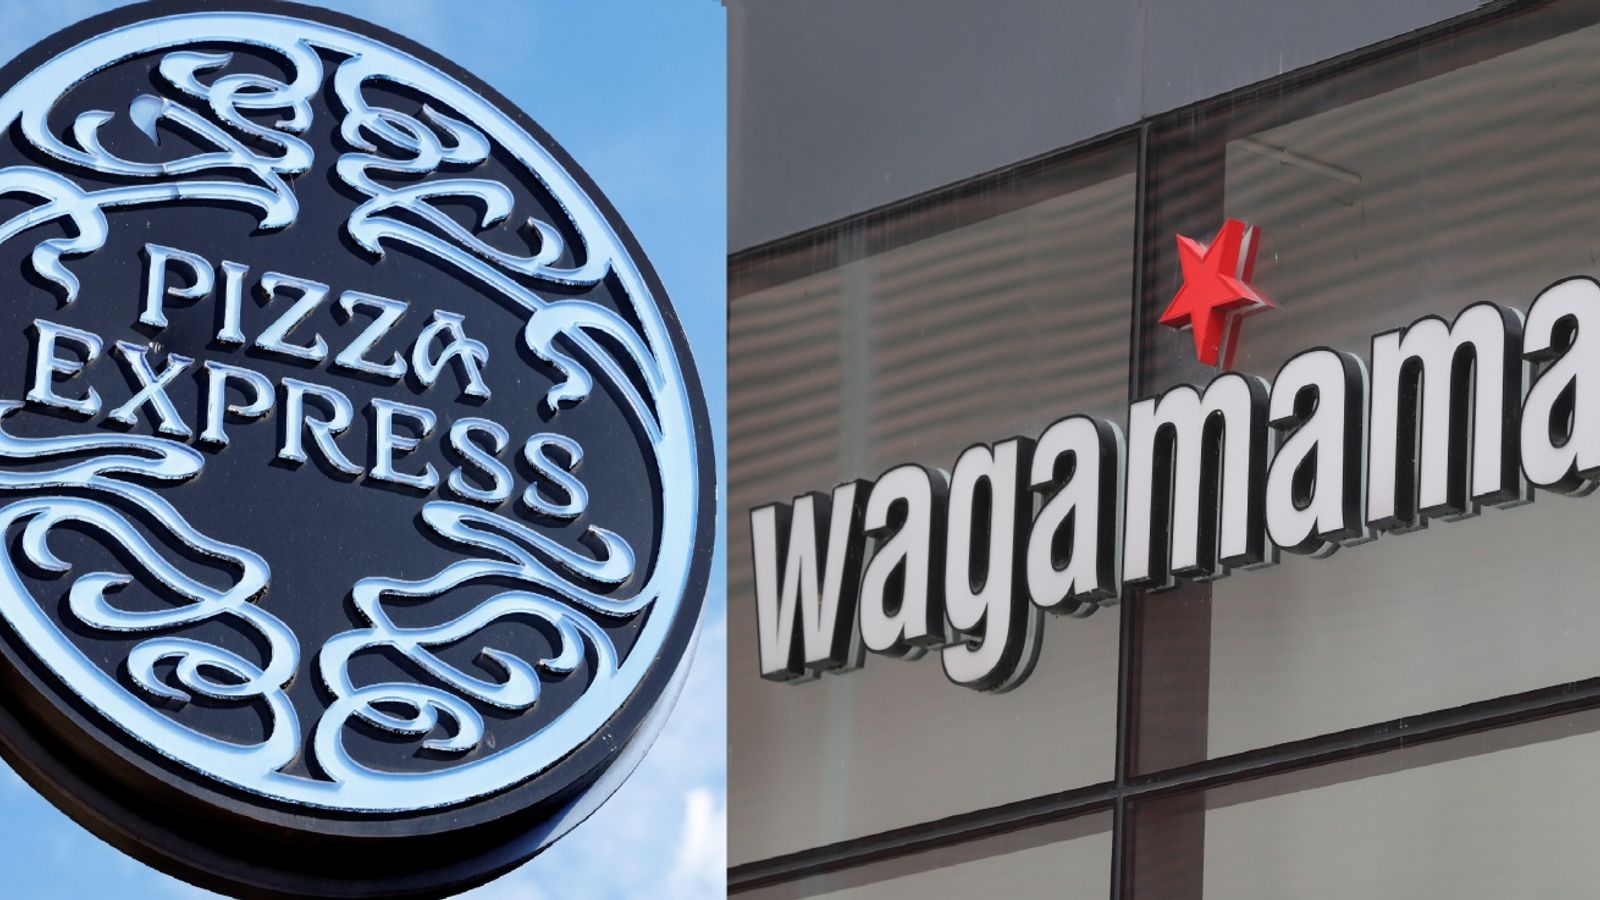 Pizza Express works up appetite to swallow Wagamama owner